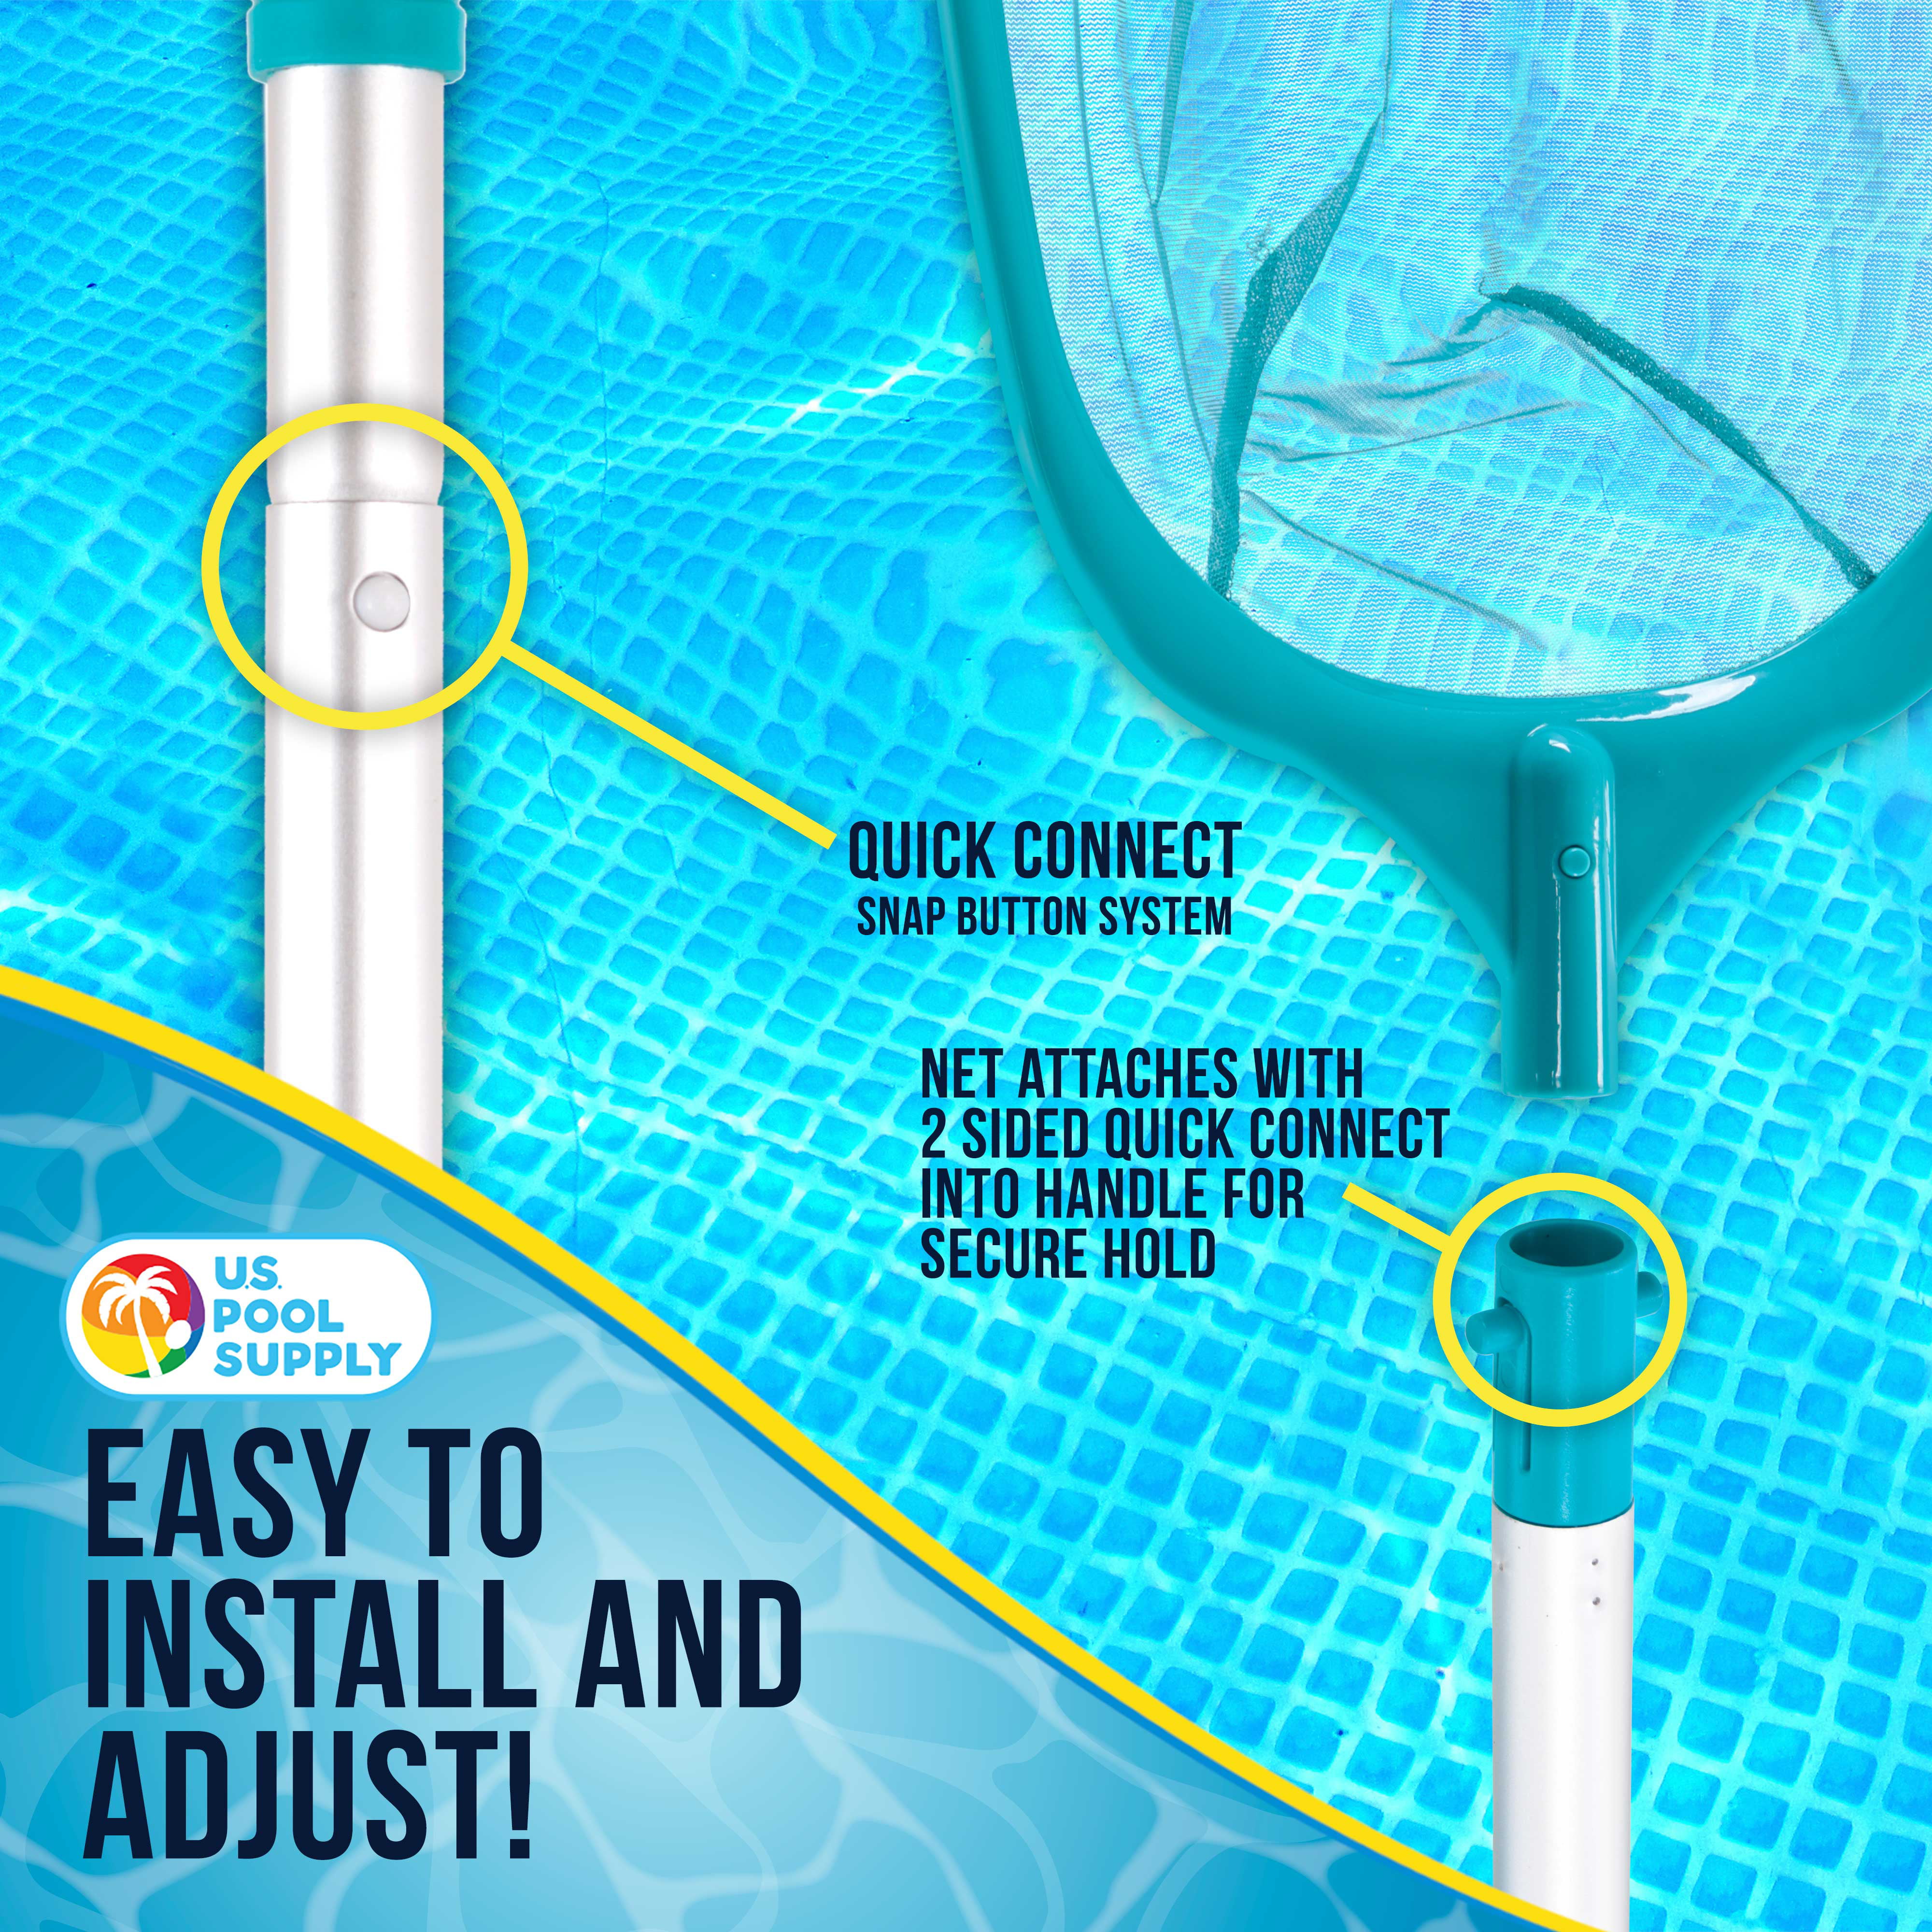 Professional Swimming Pool Leaf Skimmer Net with Detachable Aluminum Pole 59 Total Length - Deep Ultra Fine Mesh Netting Bag Basket for Fast Cleaning of The Finest Debris Clean Spas & Ponds 